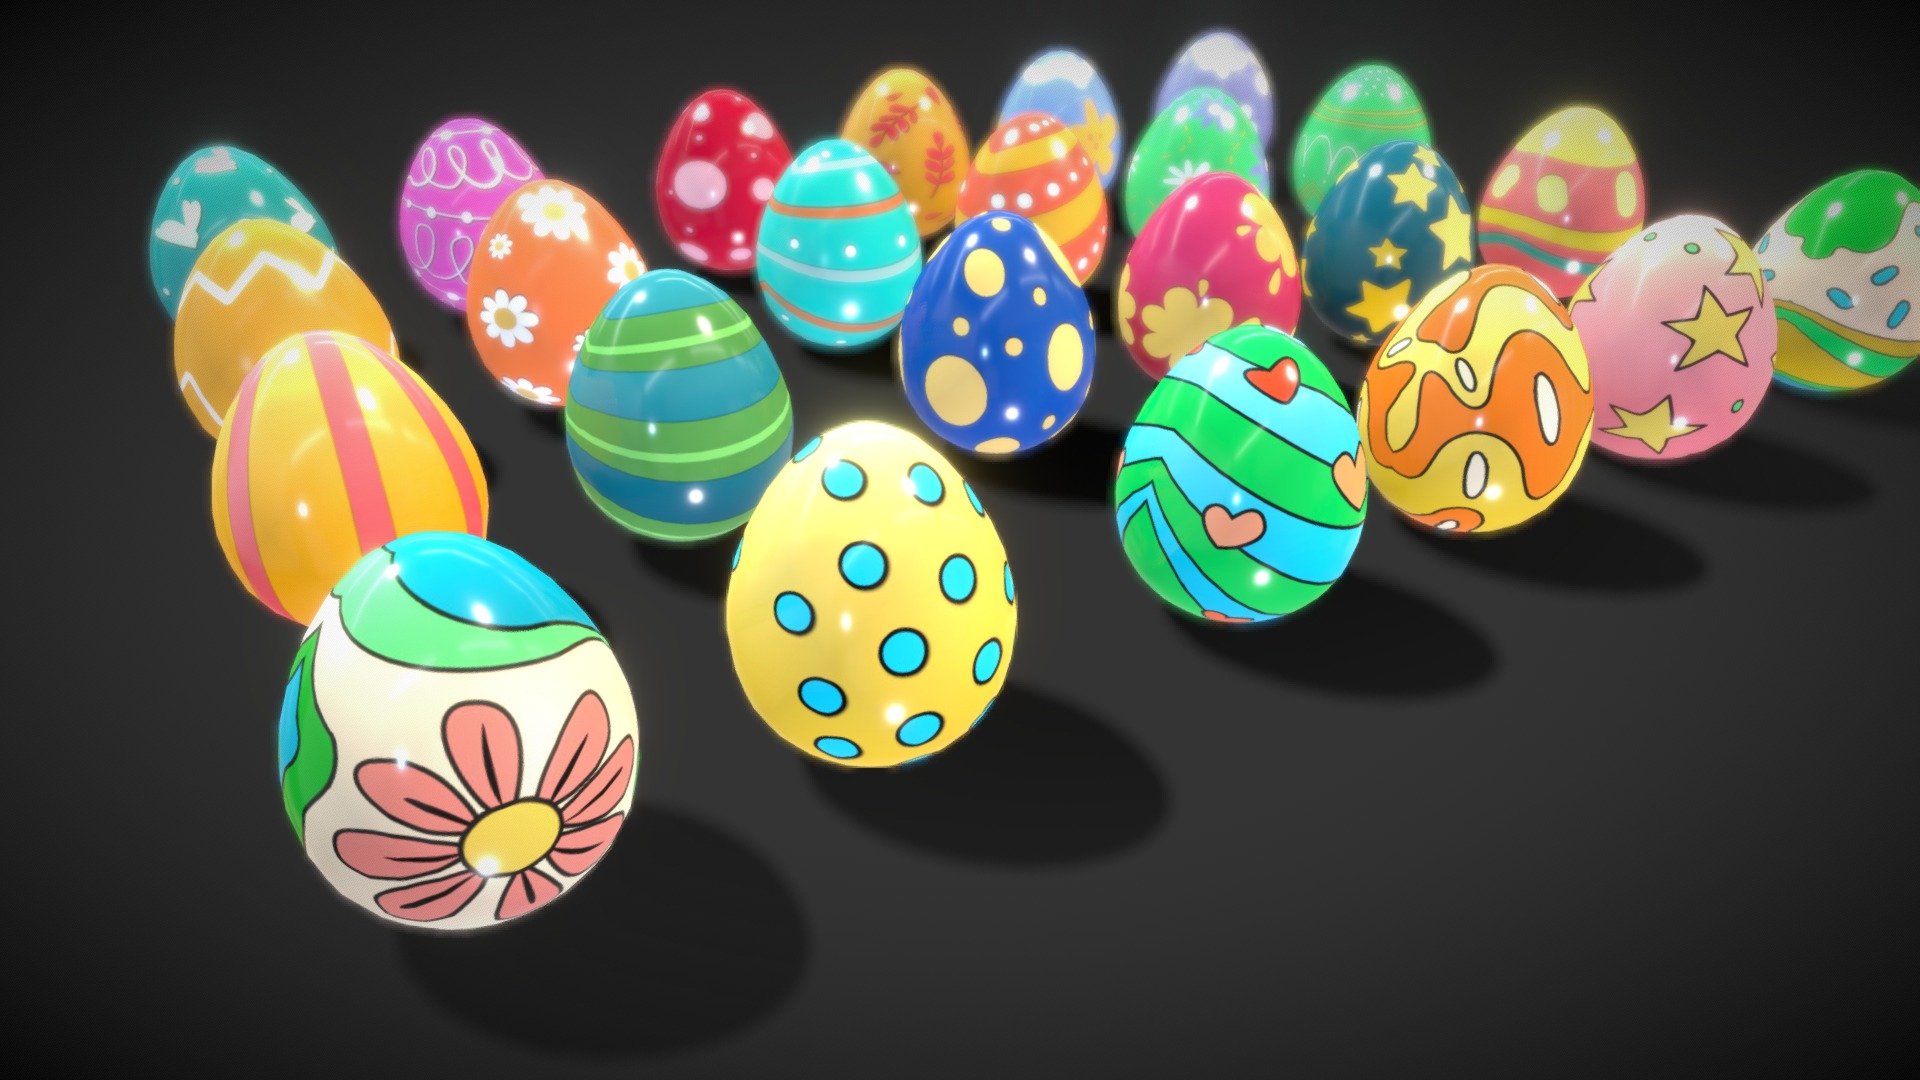 Get ready for Easter!

Collections Easter Eggs 5 model low-poly 3d model ready for Virtual Reality (VR), Augmented Reality (AR), games and other real-time apps. its ready for rendering and advertising too Features: 
- 24 egg prefabs 
- 4 Colections styles texture
-  Polycount list : 
-   Model 3D lowpoly Eggs ( 12288 polys/23040 Tris/11568 Verts) 
-    4 Texture colections size 1024/1024 Please contact me if you have questions or need assistance with the models 3d model